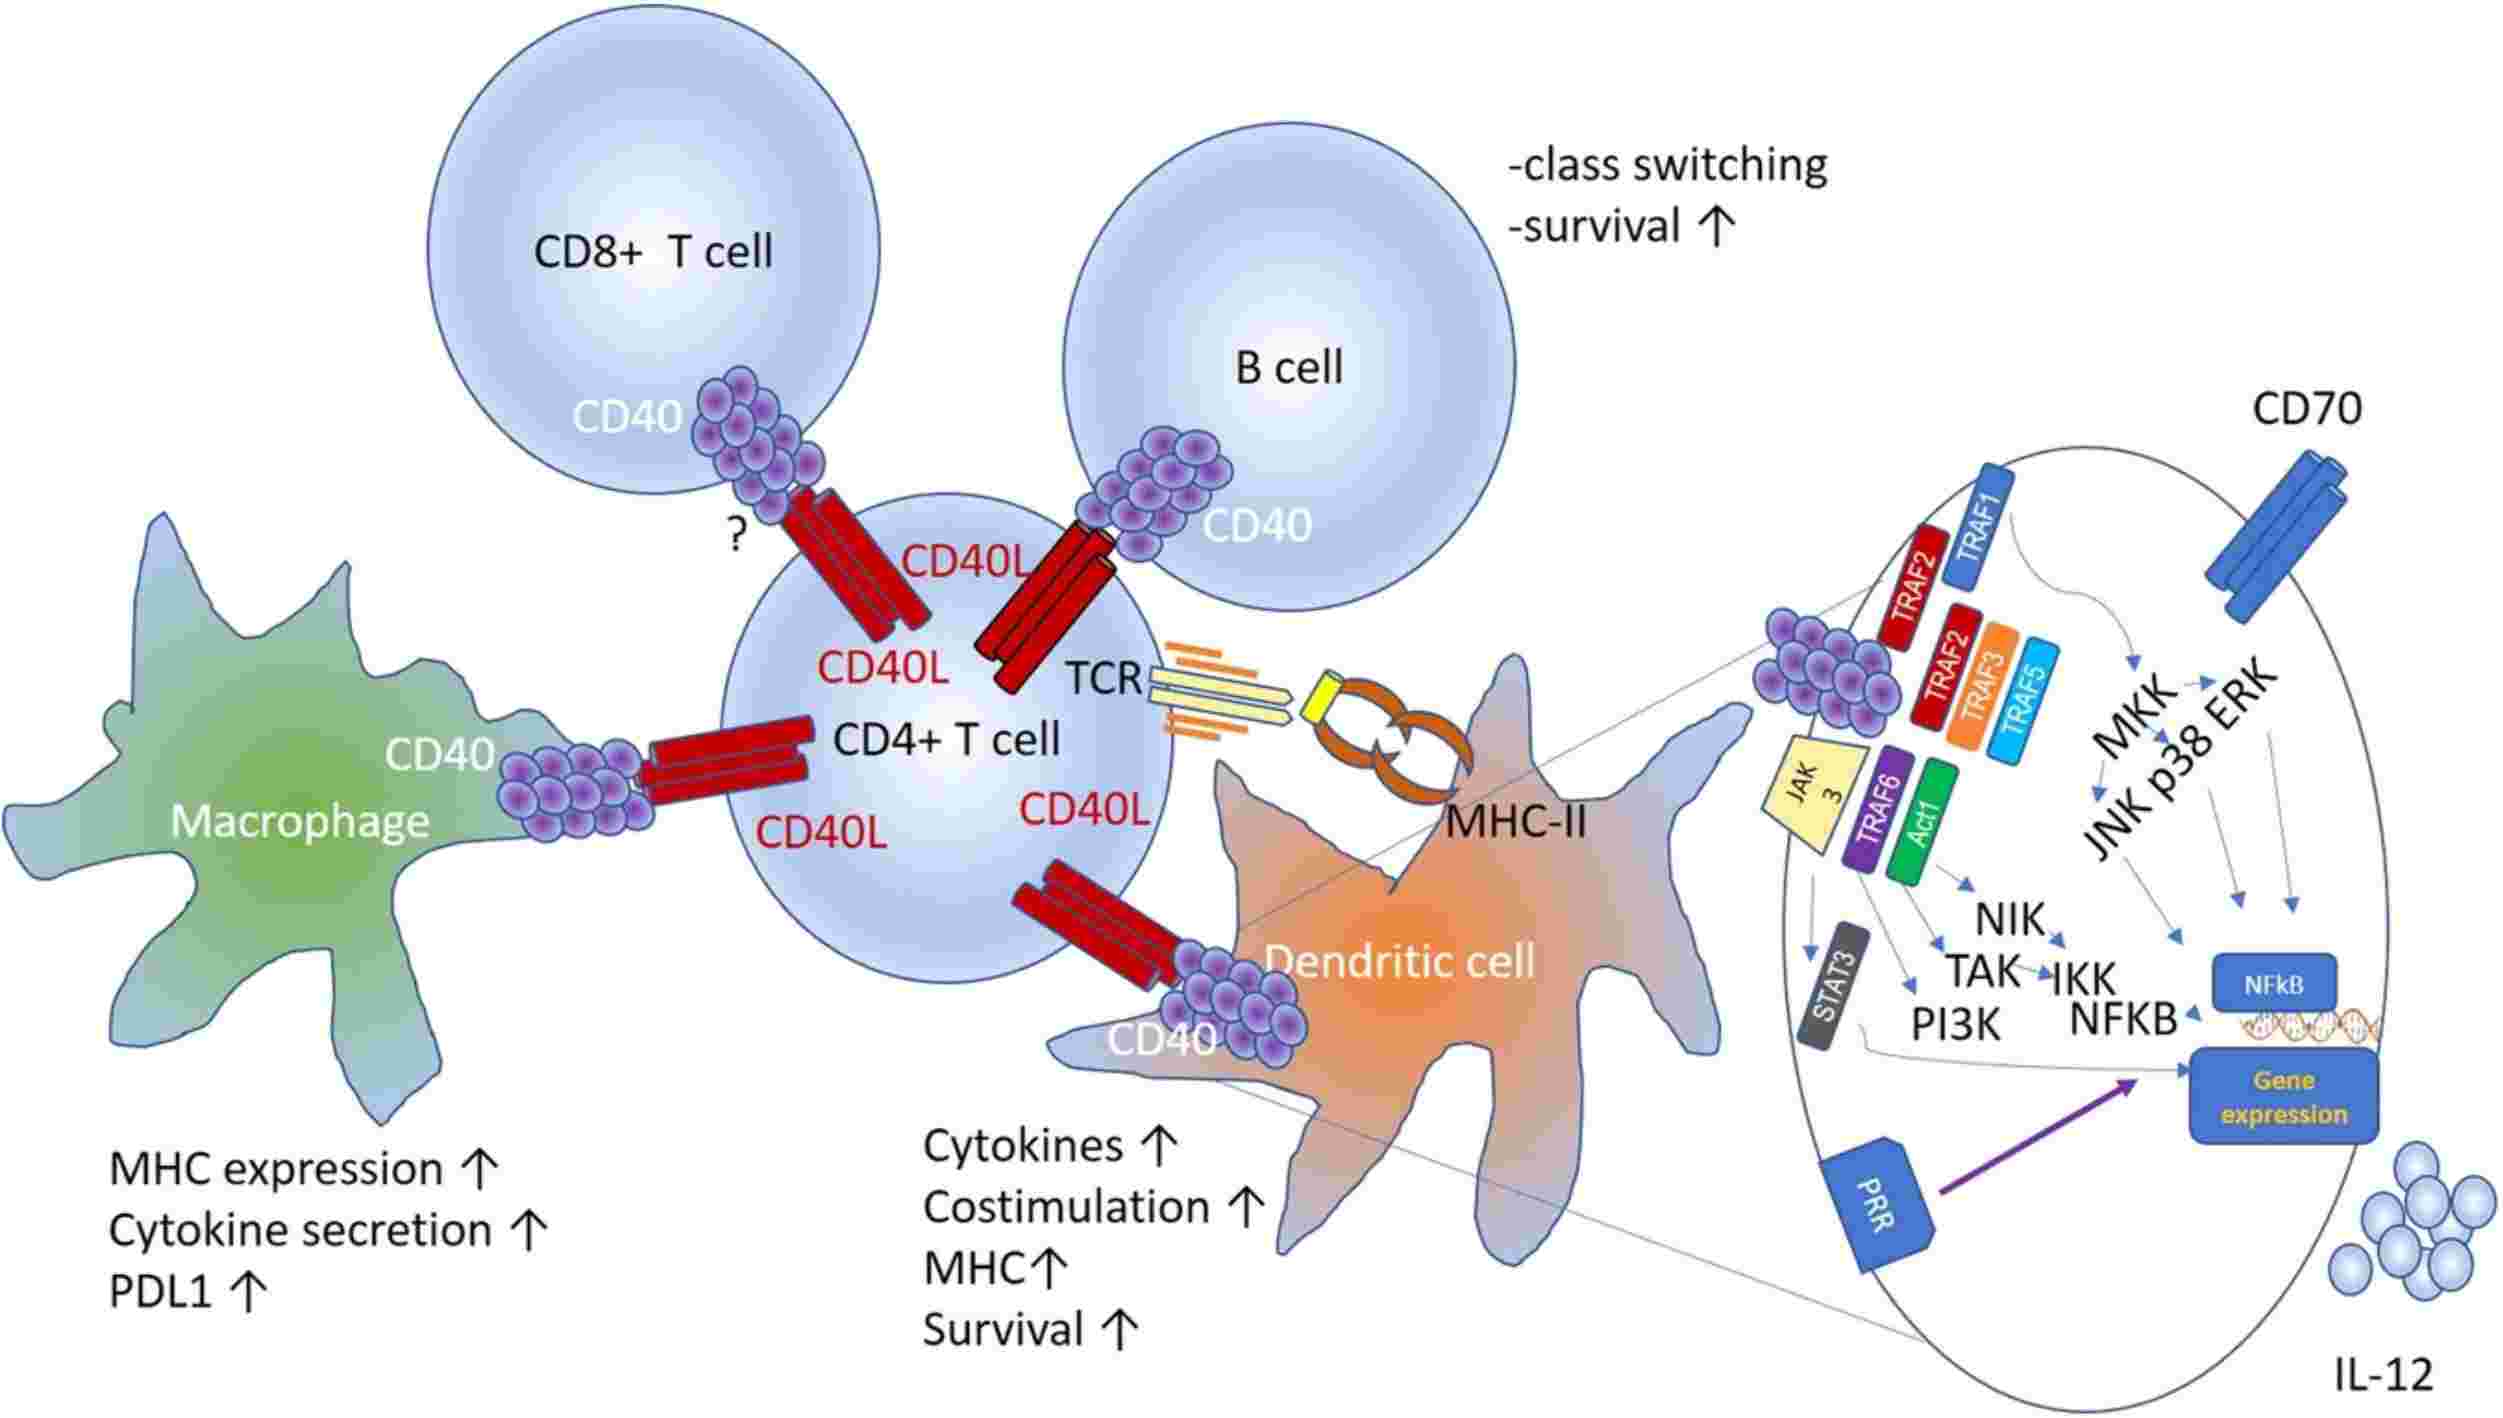 Figure 1. Schematic of the interactions between CD40L expressed by activated CD4+ T cells and other cellular components of the tumor microenvironment. (Bullock T N J, et al., 2022)